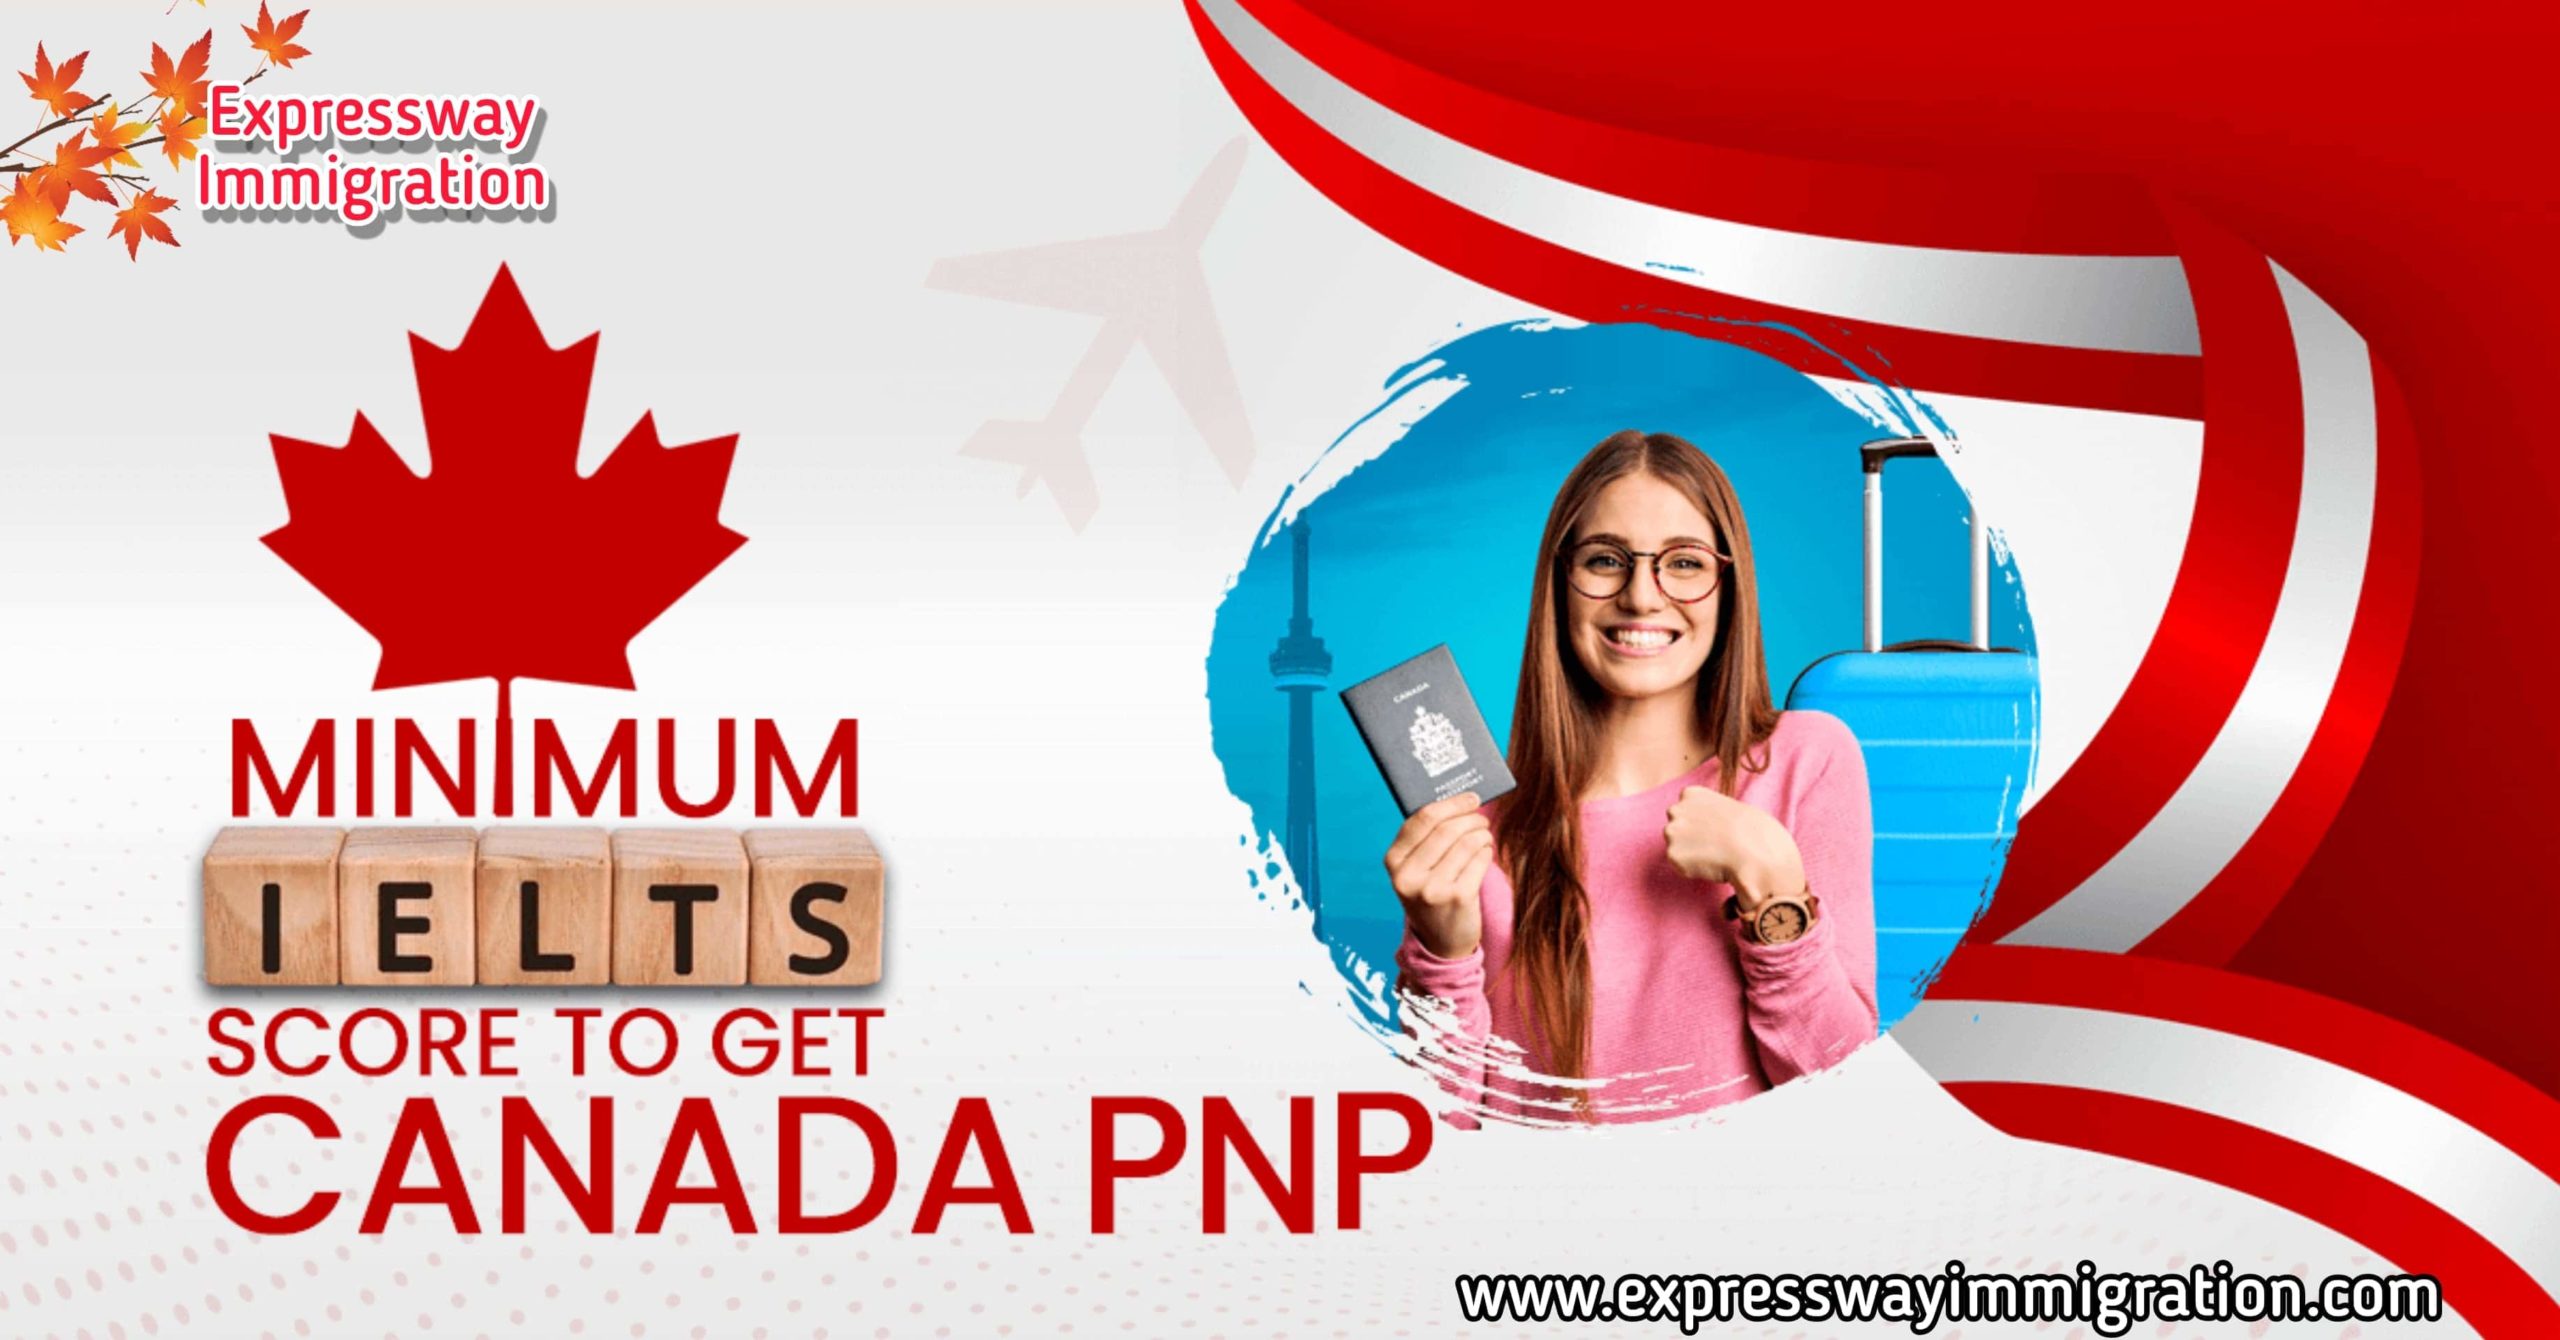 What is the Minimum IELTS Score Required for Canada PNP